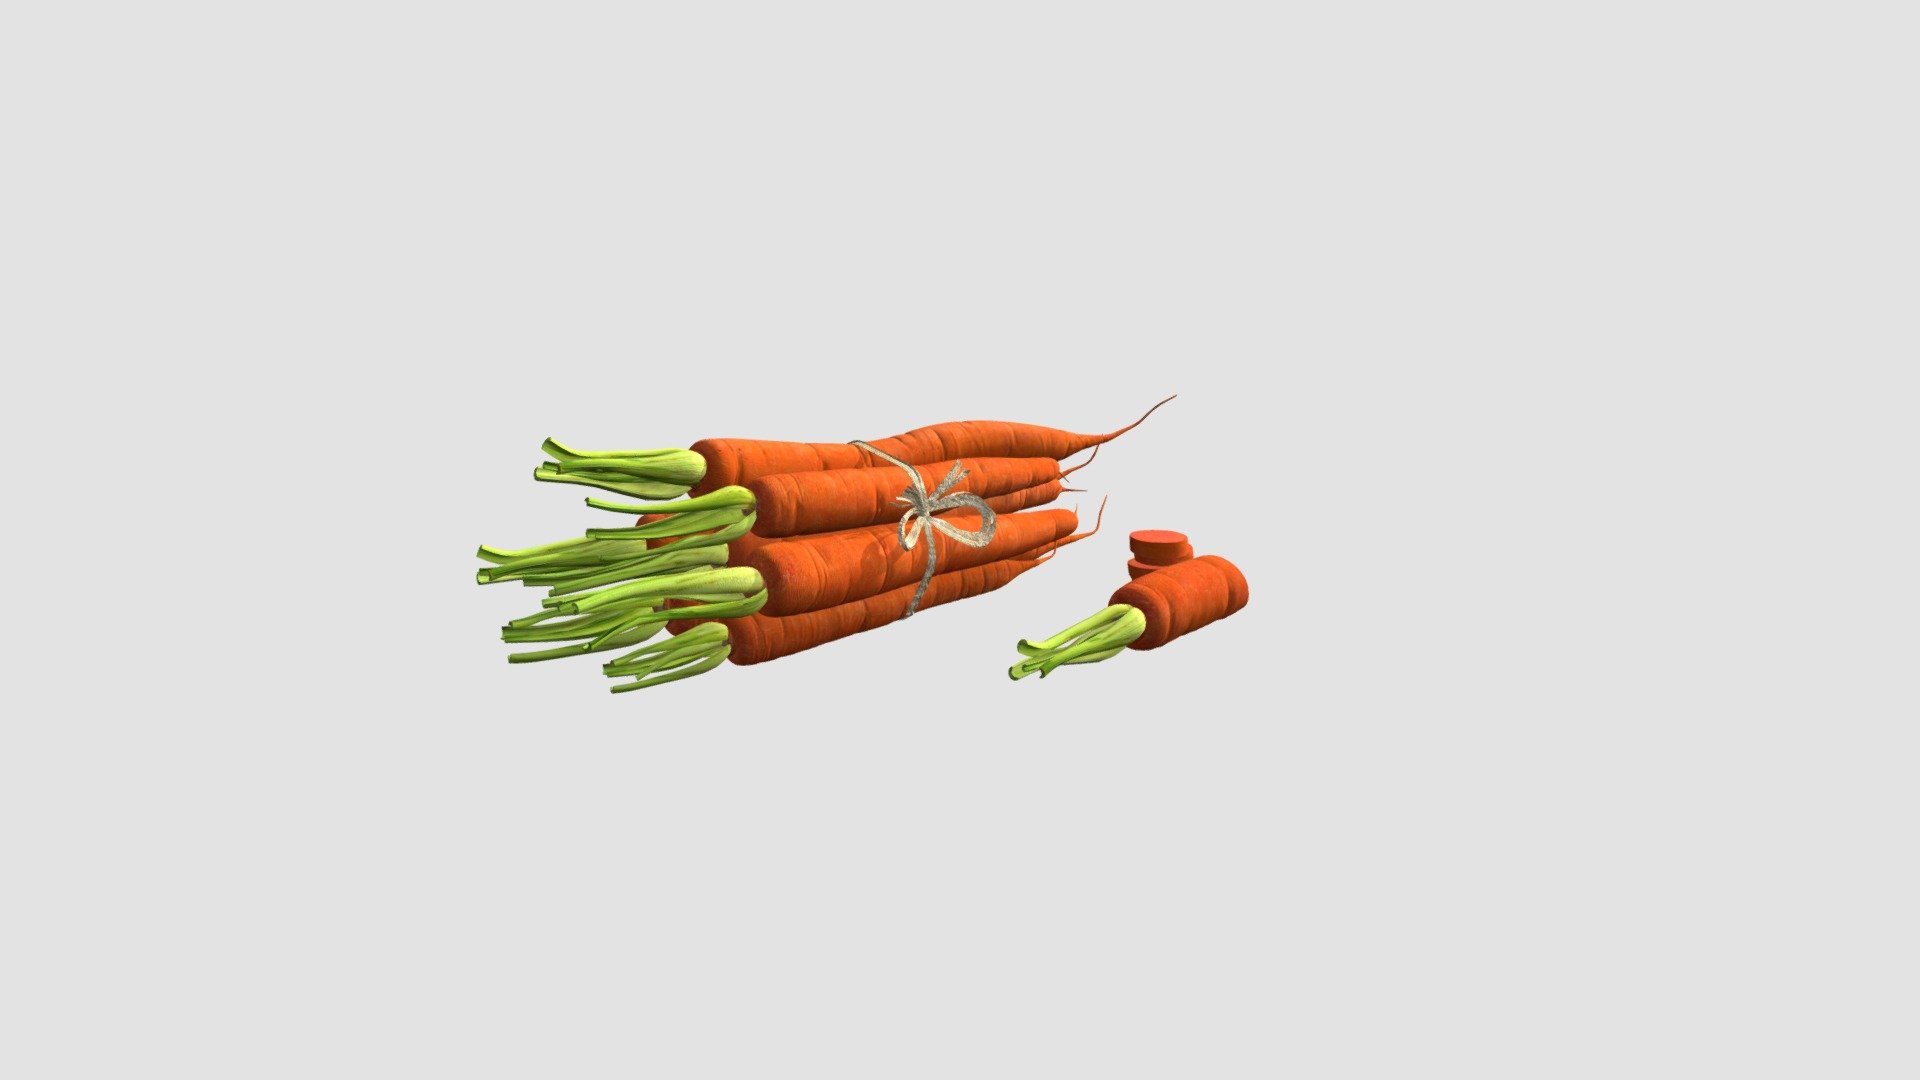 Highly detailed 3d model of carrots with all textures, shaders and materials. It is ready to use, just put it into your scene 3d model